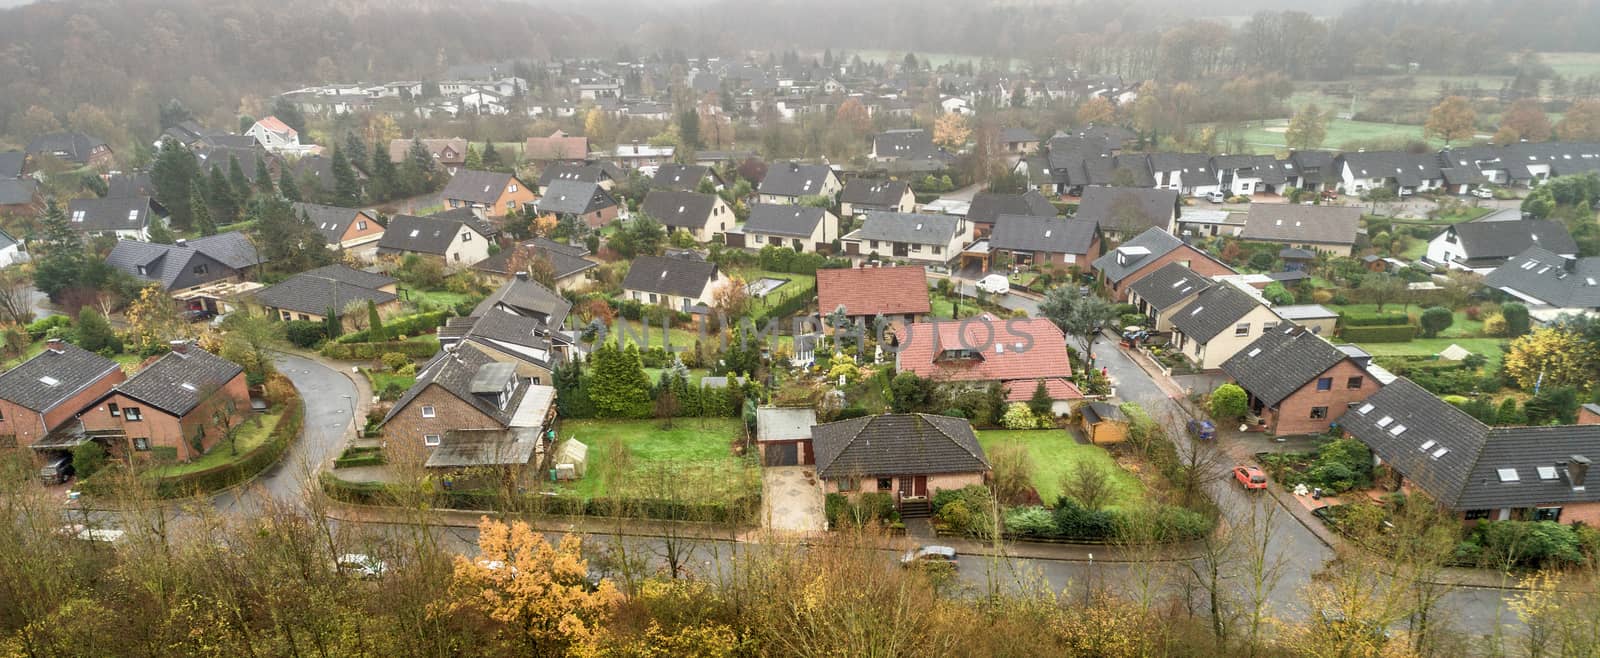 Suburb in Germany. Aerial view of single-family houses, gardens  by geogif